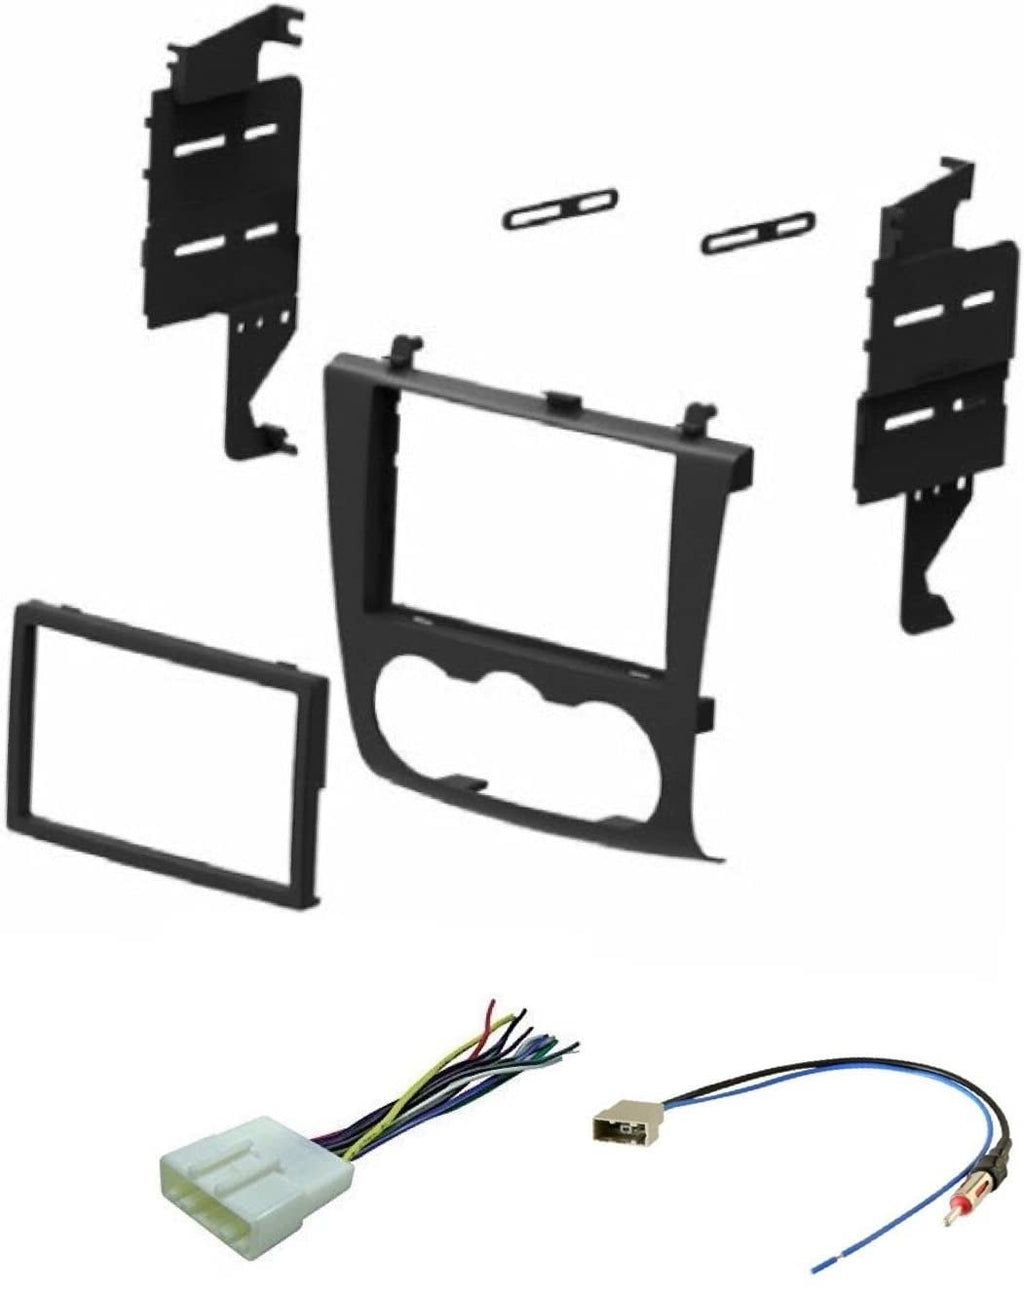  [AUSTRALIA] - ASC Audio Car Stereo Install Dash Kit, Wire Harness and Antenna Adapter for Installing a Double Din Aftermarket Radio for 2007 2008 2009 2010 2011 2012 Nissan Altima w/Manual Climate Knobs Only